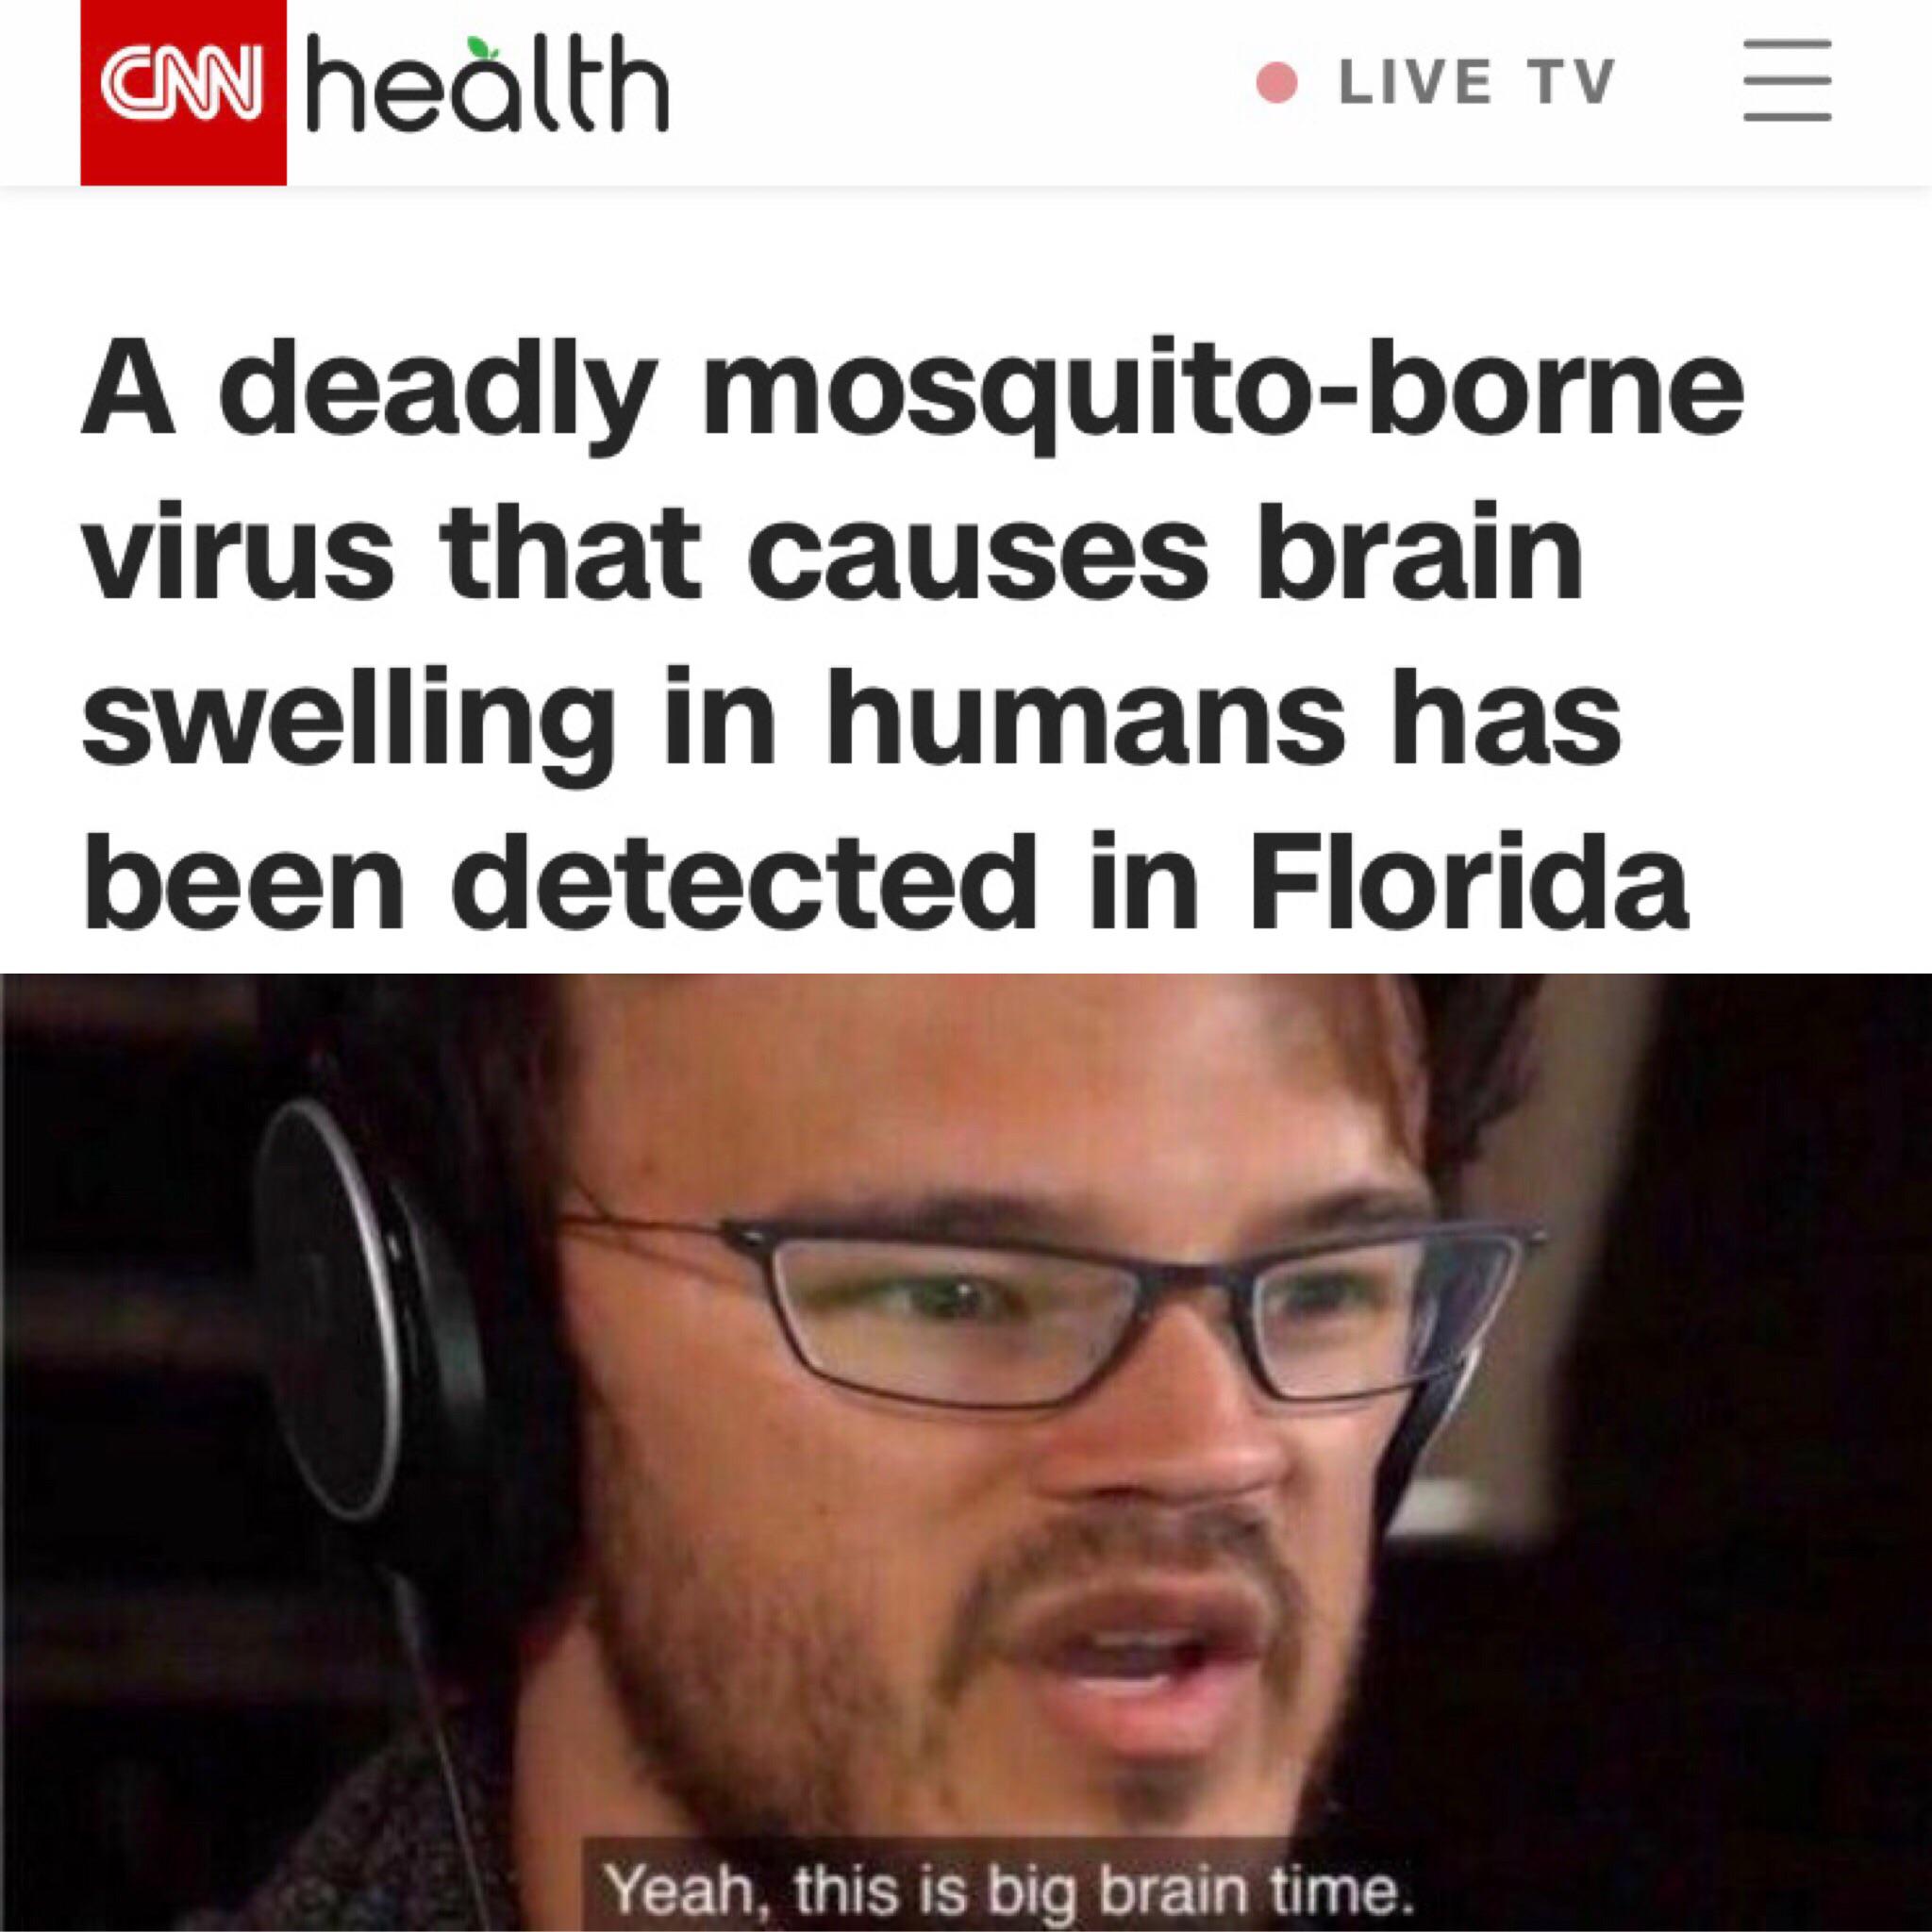 big brain time memes - Cnn health Live Tv A deadly mosquitoborne virus that causes brain swelling in humans has been detected in Florida Yeah, this is big brain time.